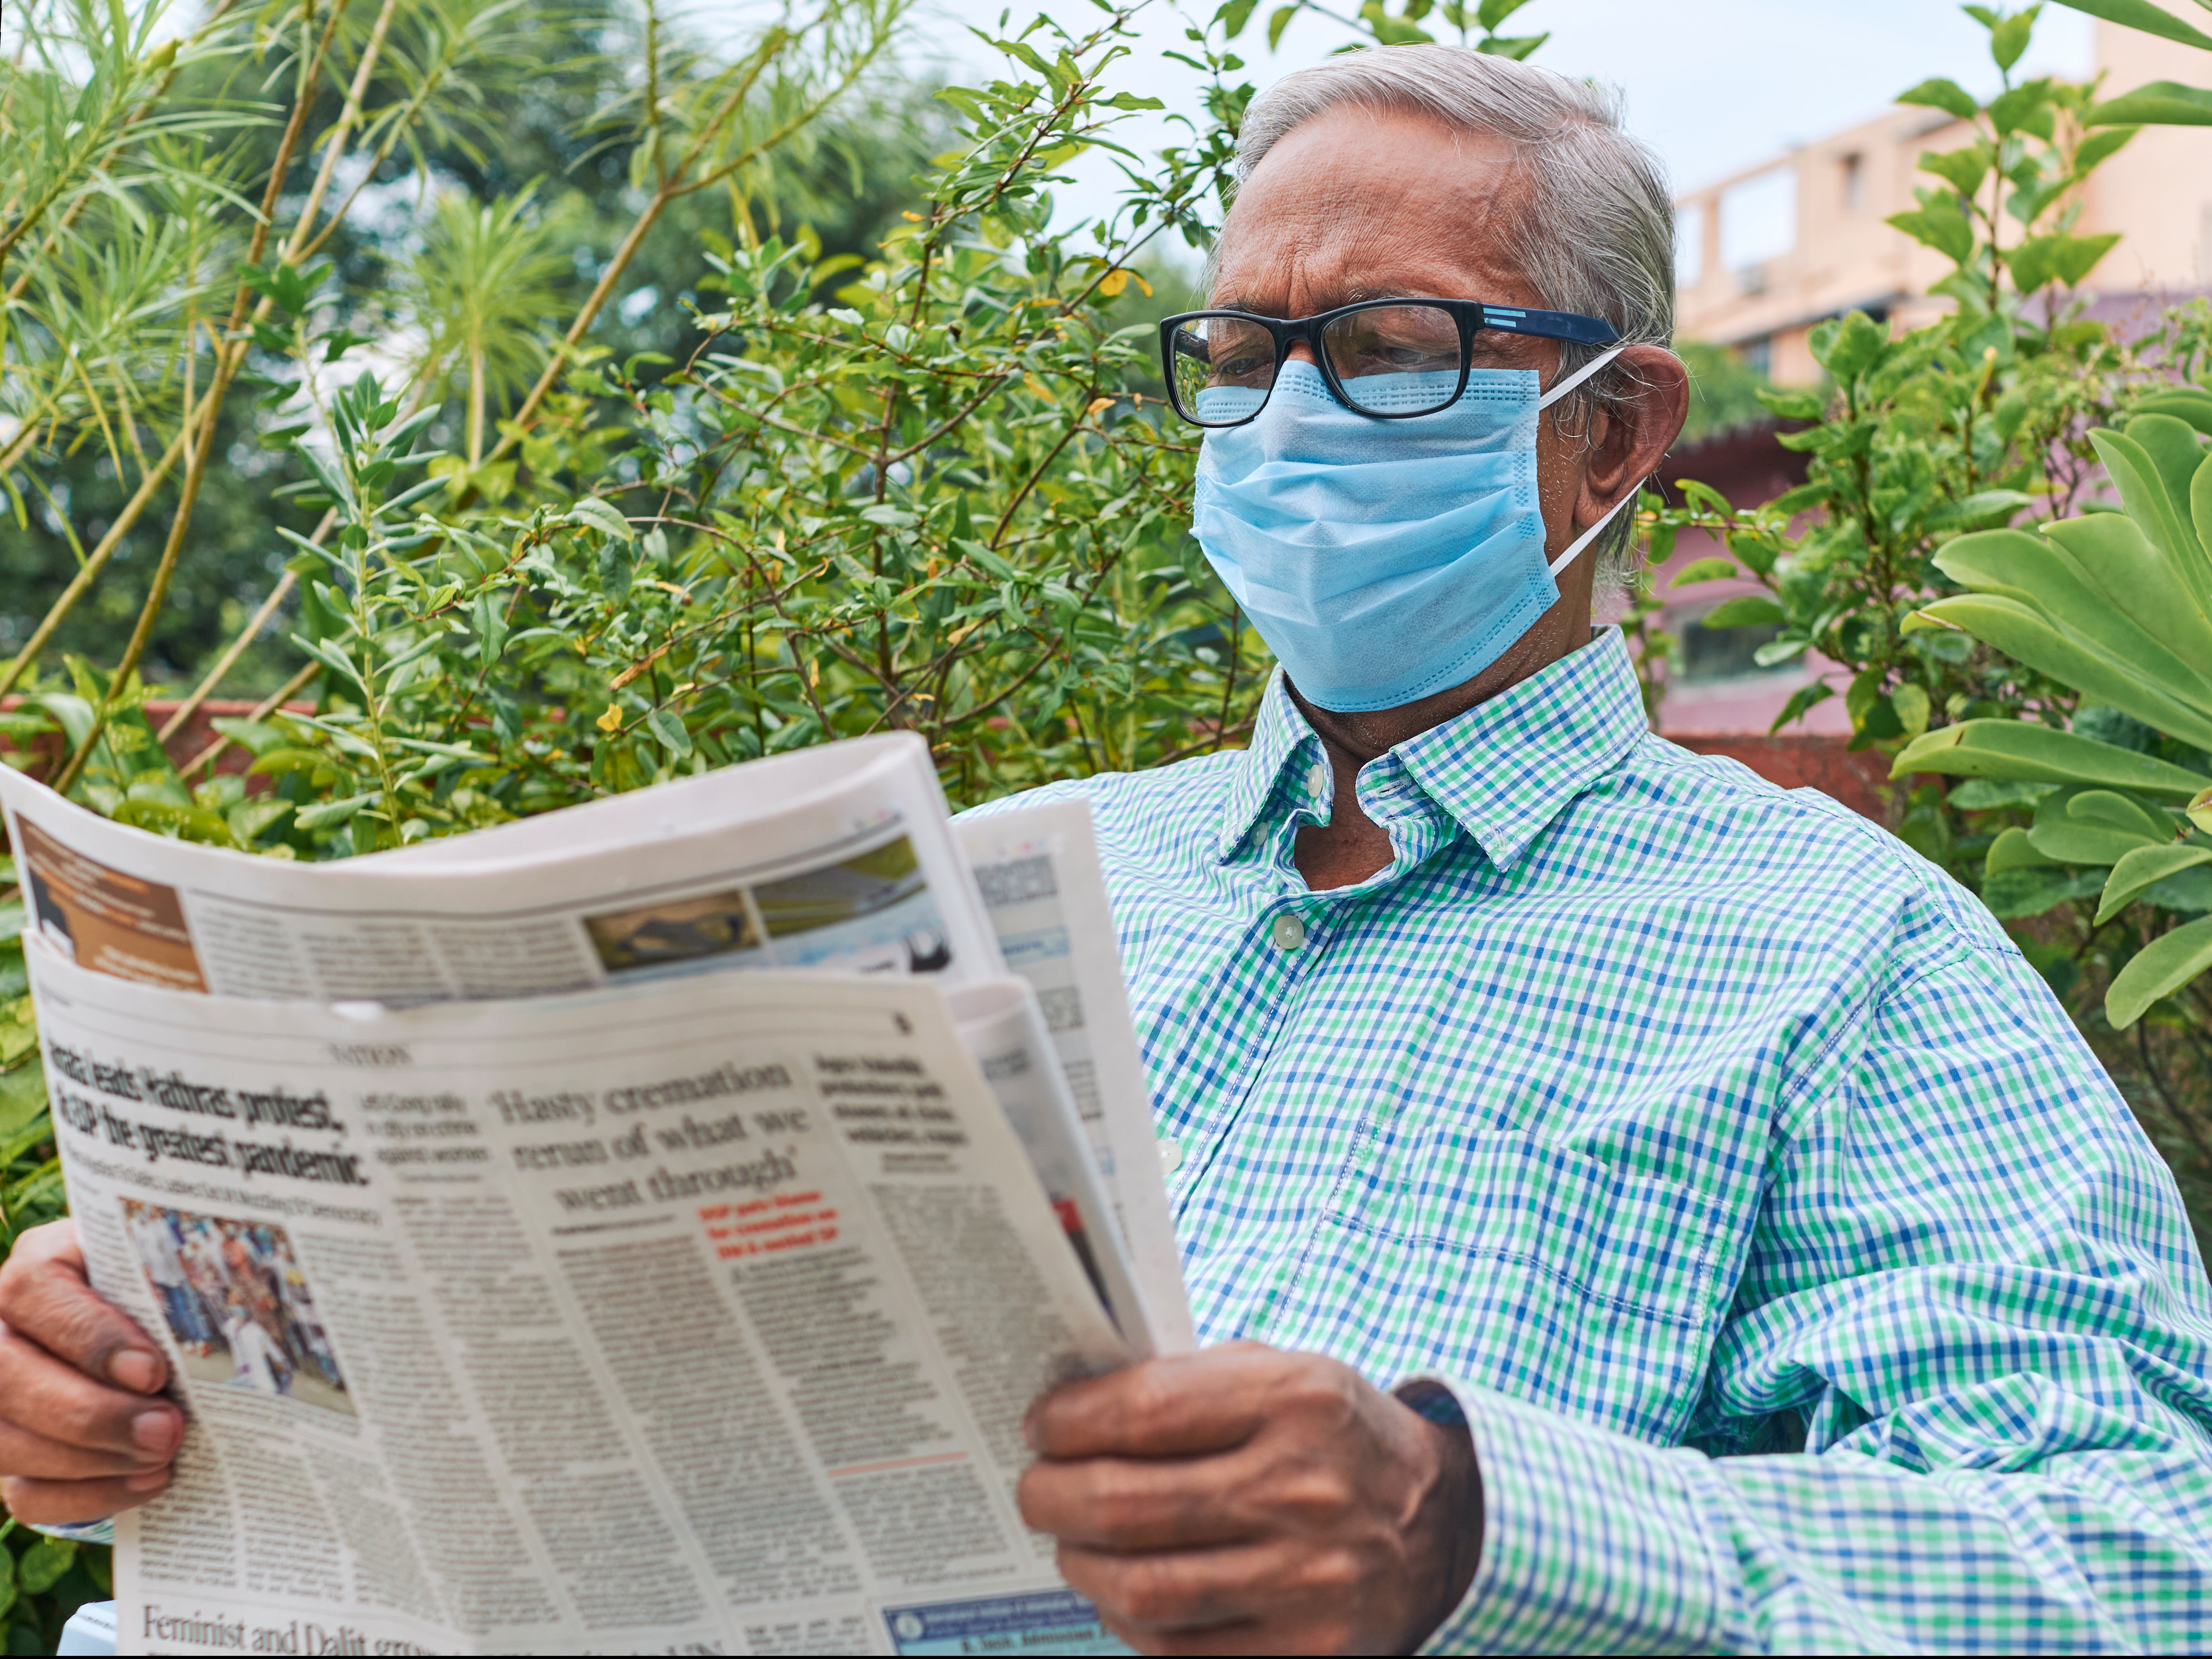 A man reads a newspaper during the coronavirus pandemic.